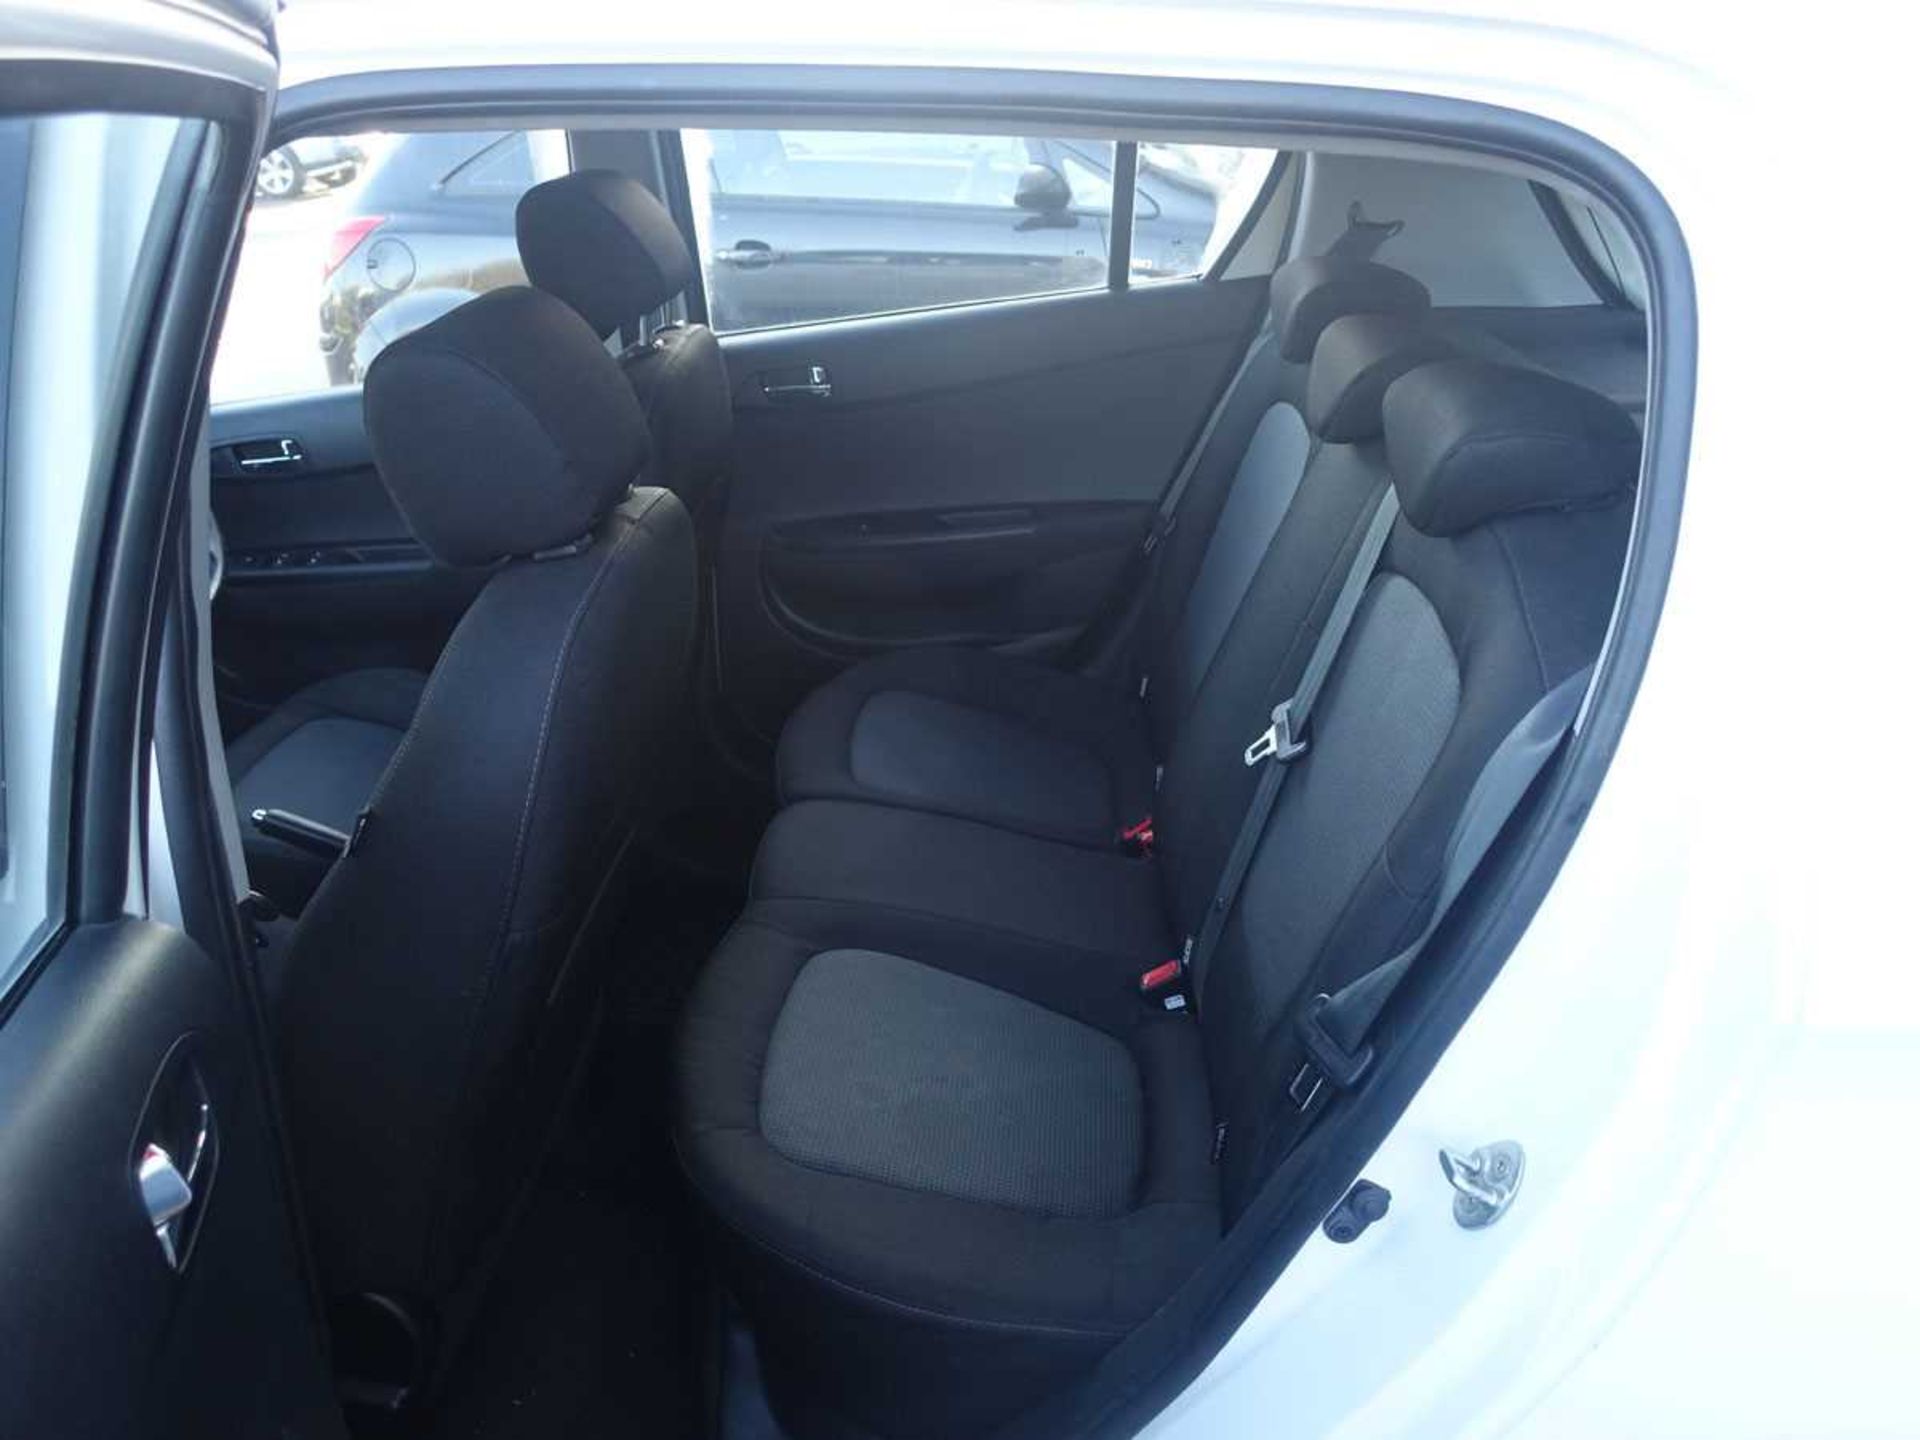 (EX64 AYU) Hyundai i20 Active in white, 5 speed manual, first registered 01/10/2014, 1248cc gas bi- - Image 4 of 9